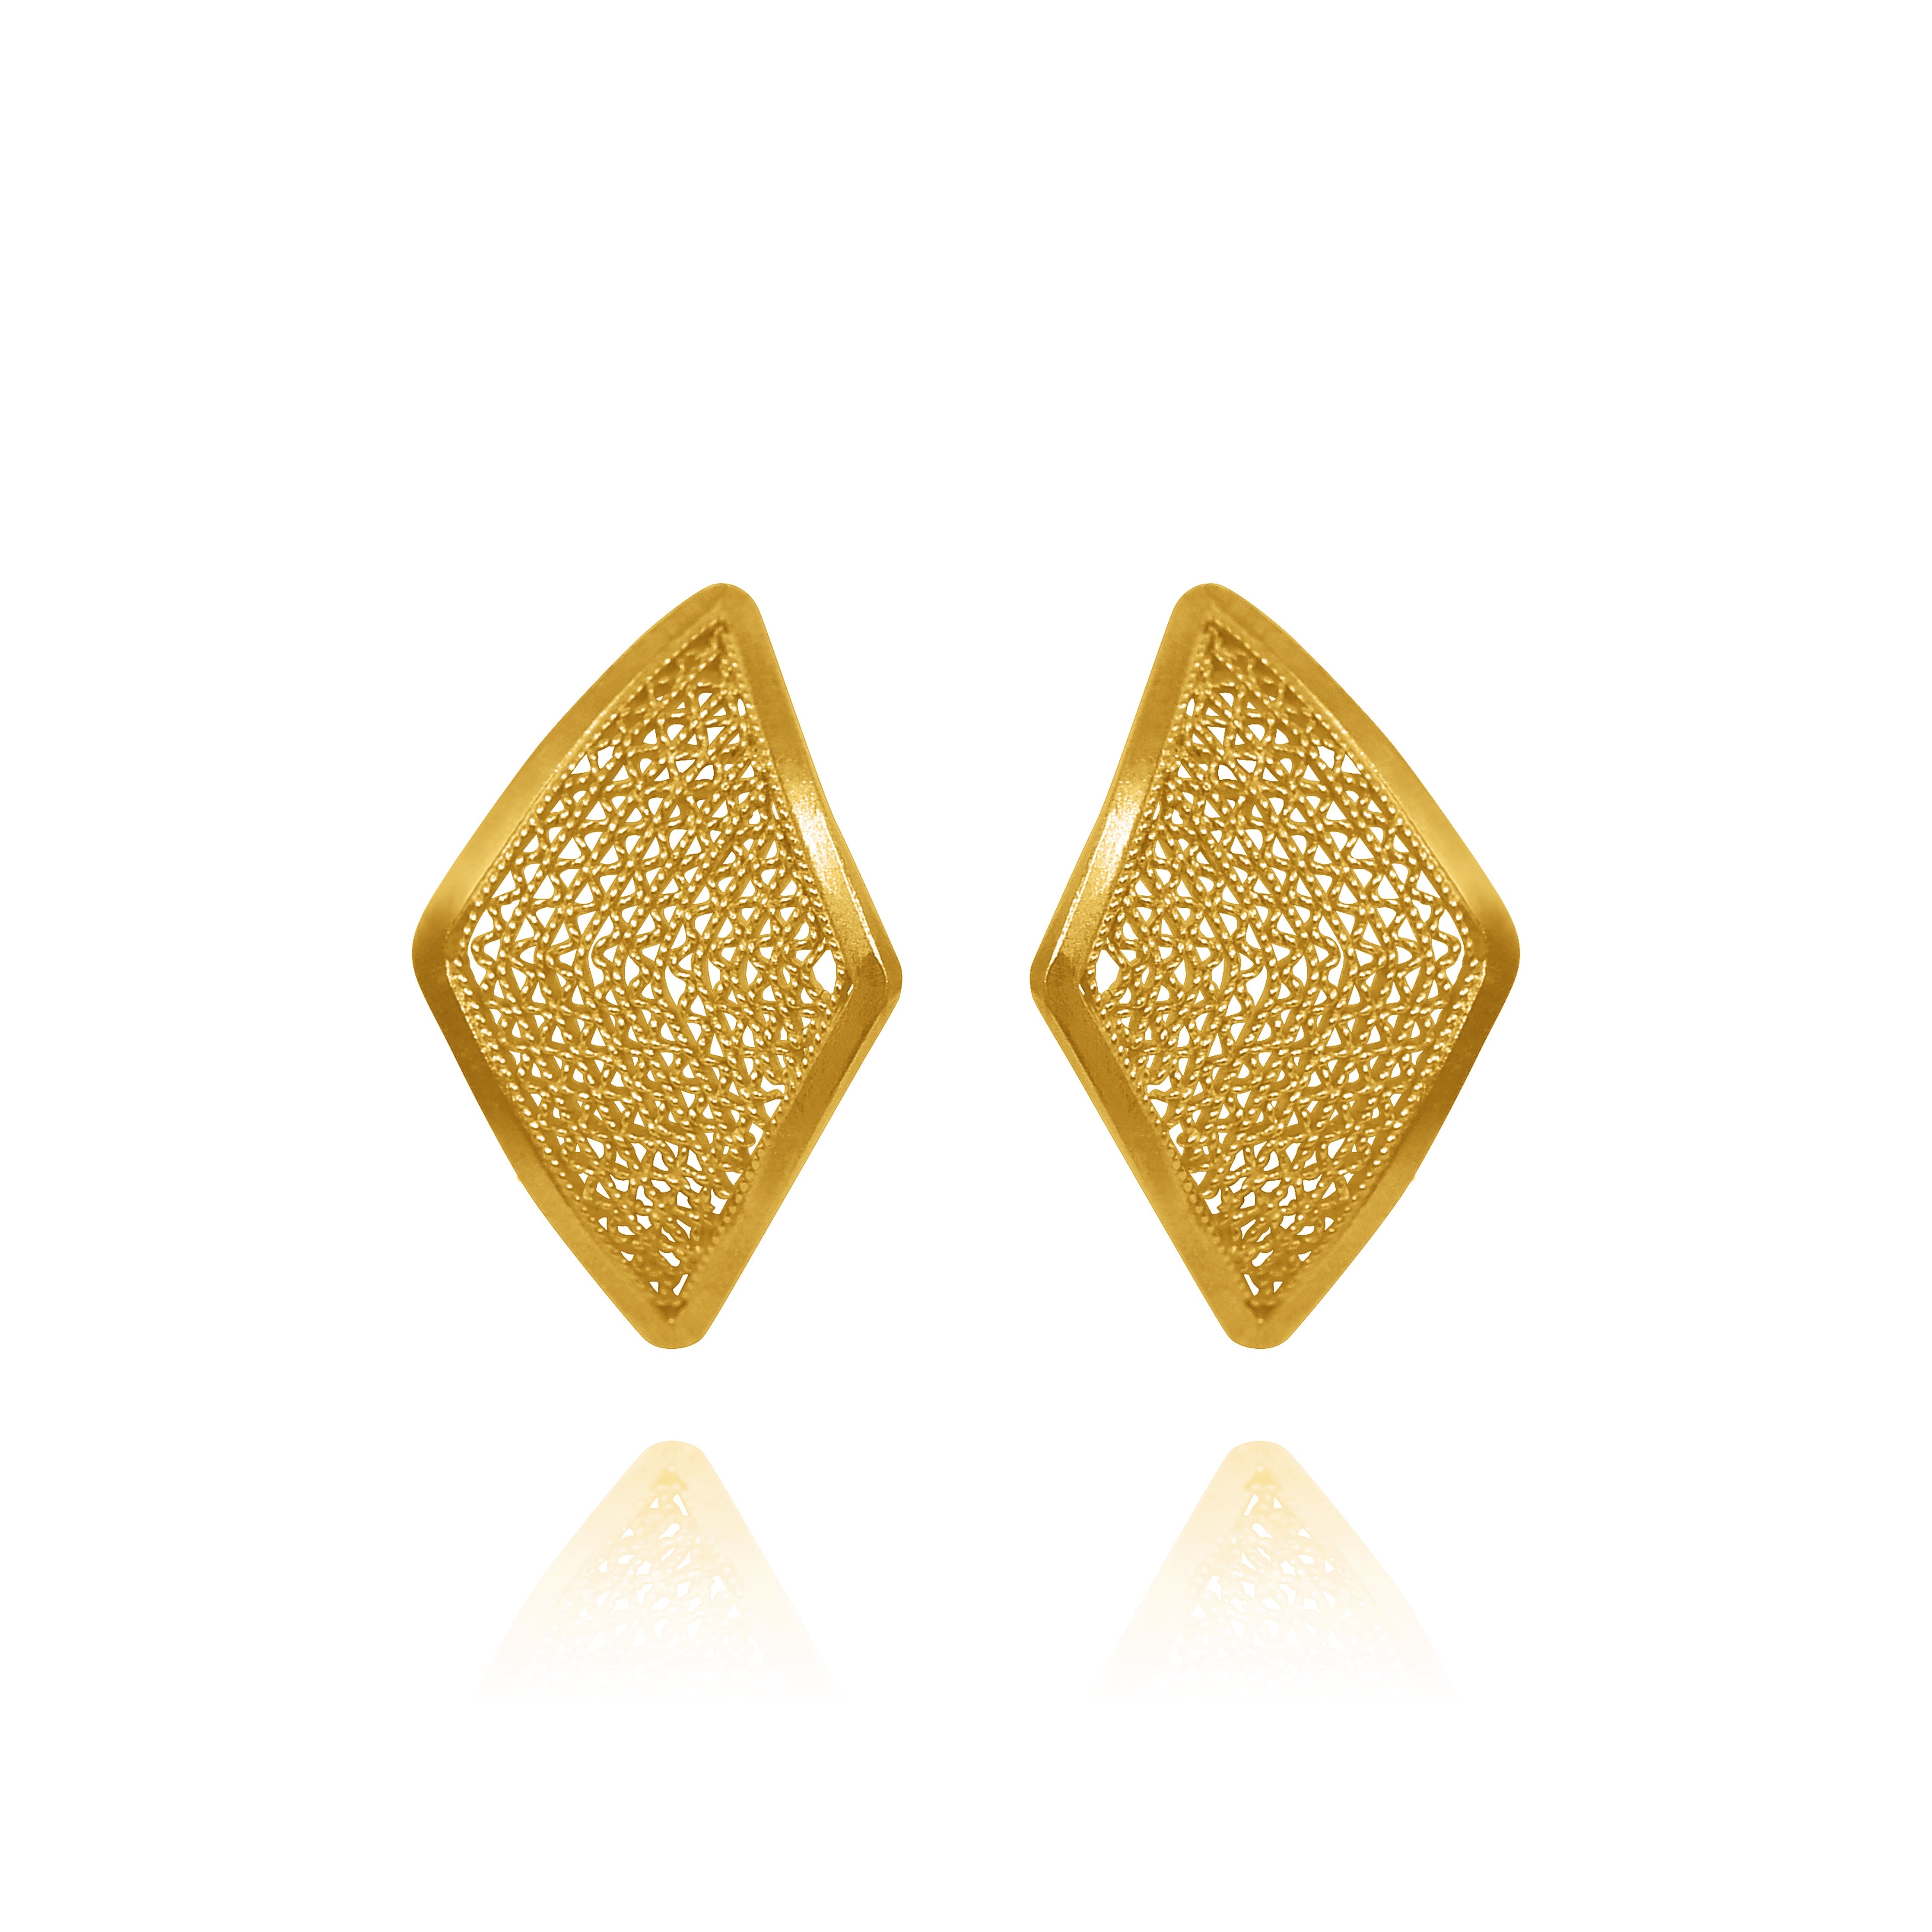 Daily use light weight gold stud earrings designs with price // new gold  earrings designs collection - YouTube